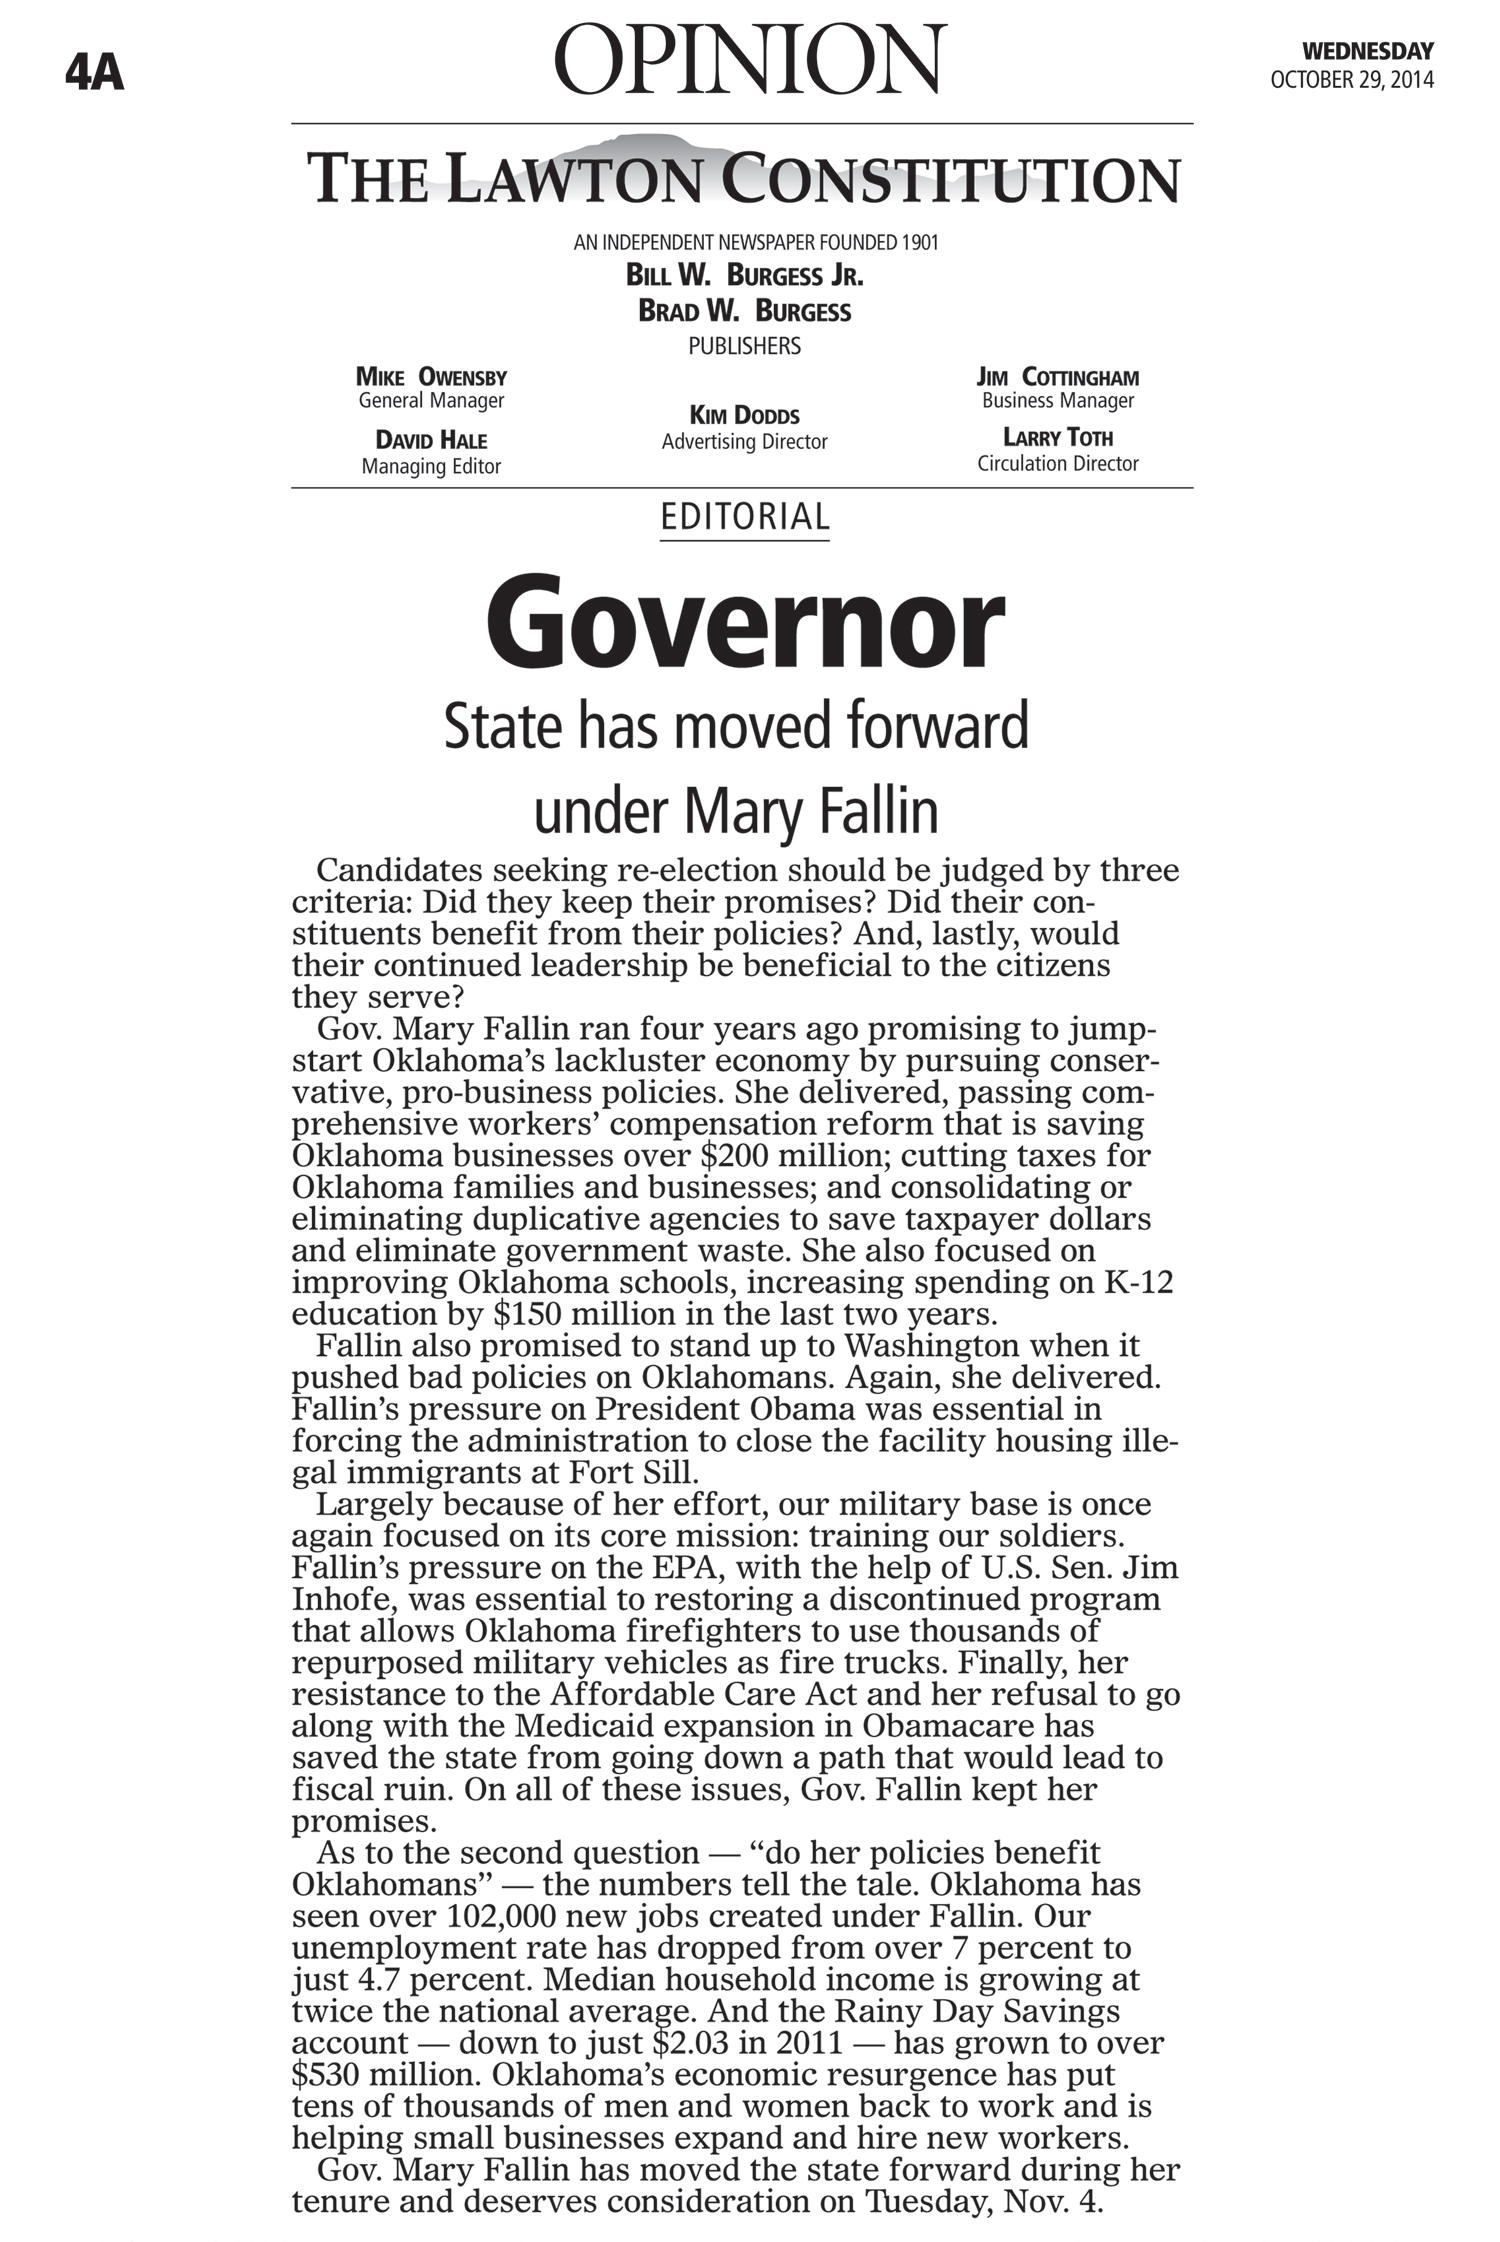 The Lawton Constitution Endorses Mary Fallin for Governor